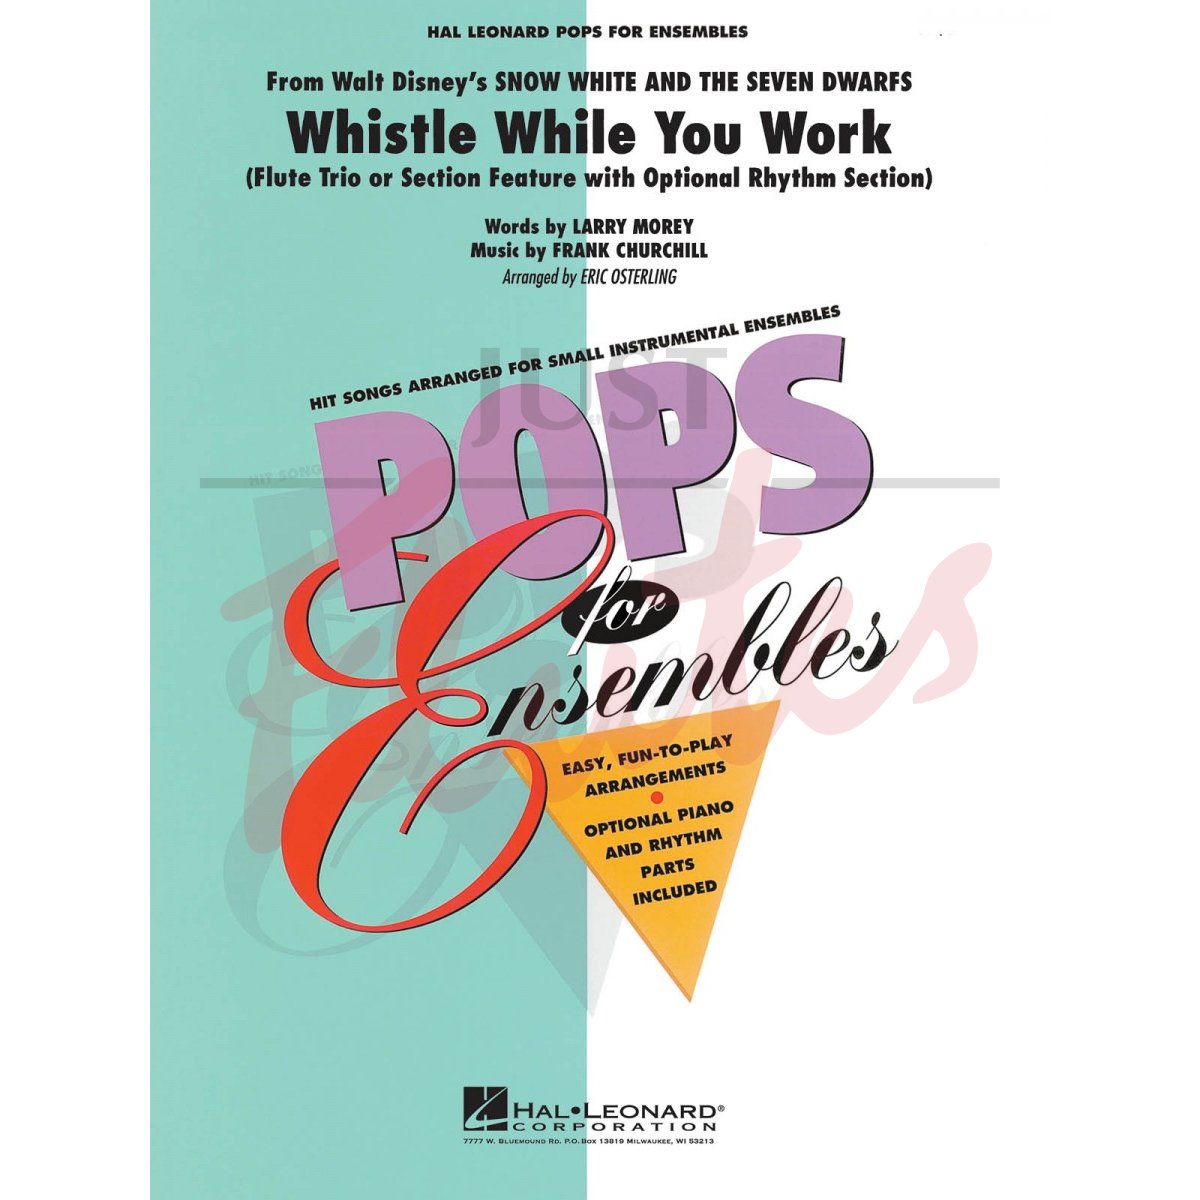 Whistle While You Work from &quot;Snow White and the Seven Dwarfs&quot; for Three Flutes and optional Rhythm Section